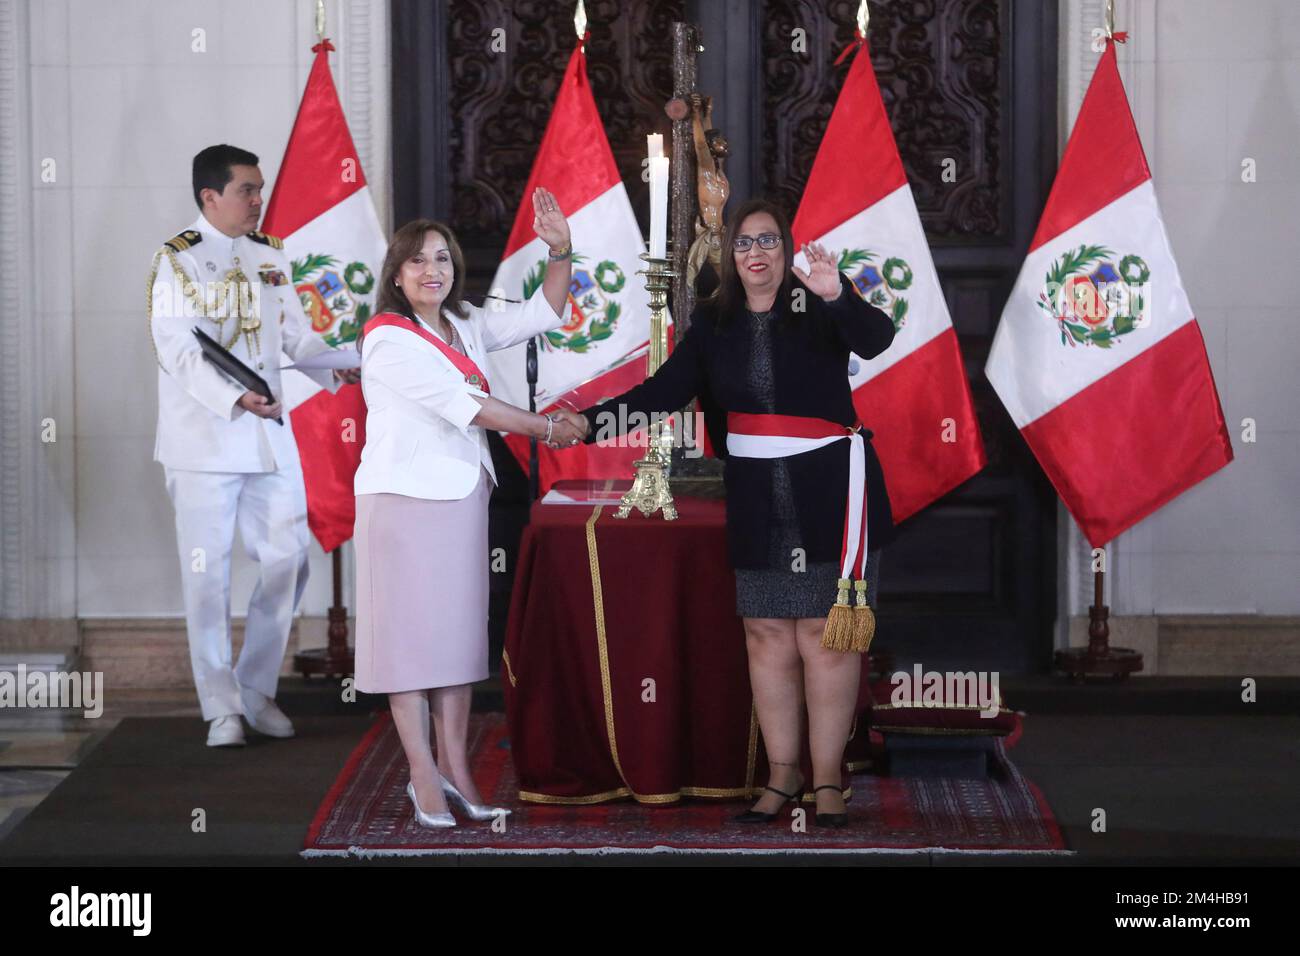 Nelly Paredes del Castillo is sworn in as Minister of Agrarian Development  and Irrigation by Peru's President Dina Boluarte, who took office after her  predecessor Pedro Castillo was ousted, in Lima, Peru,